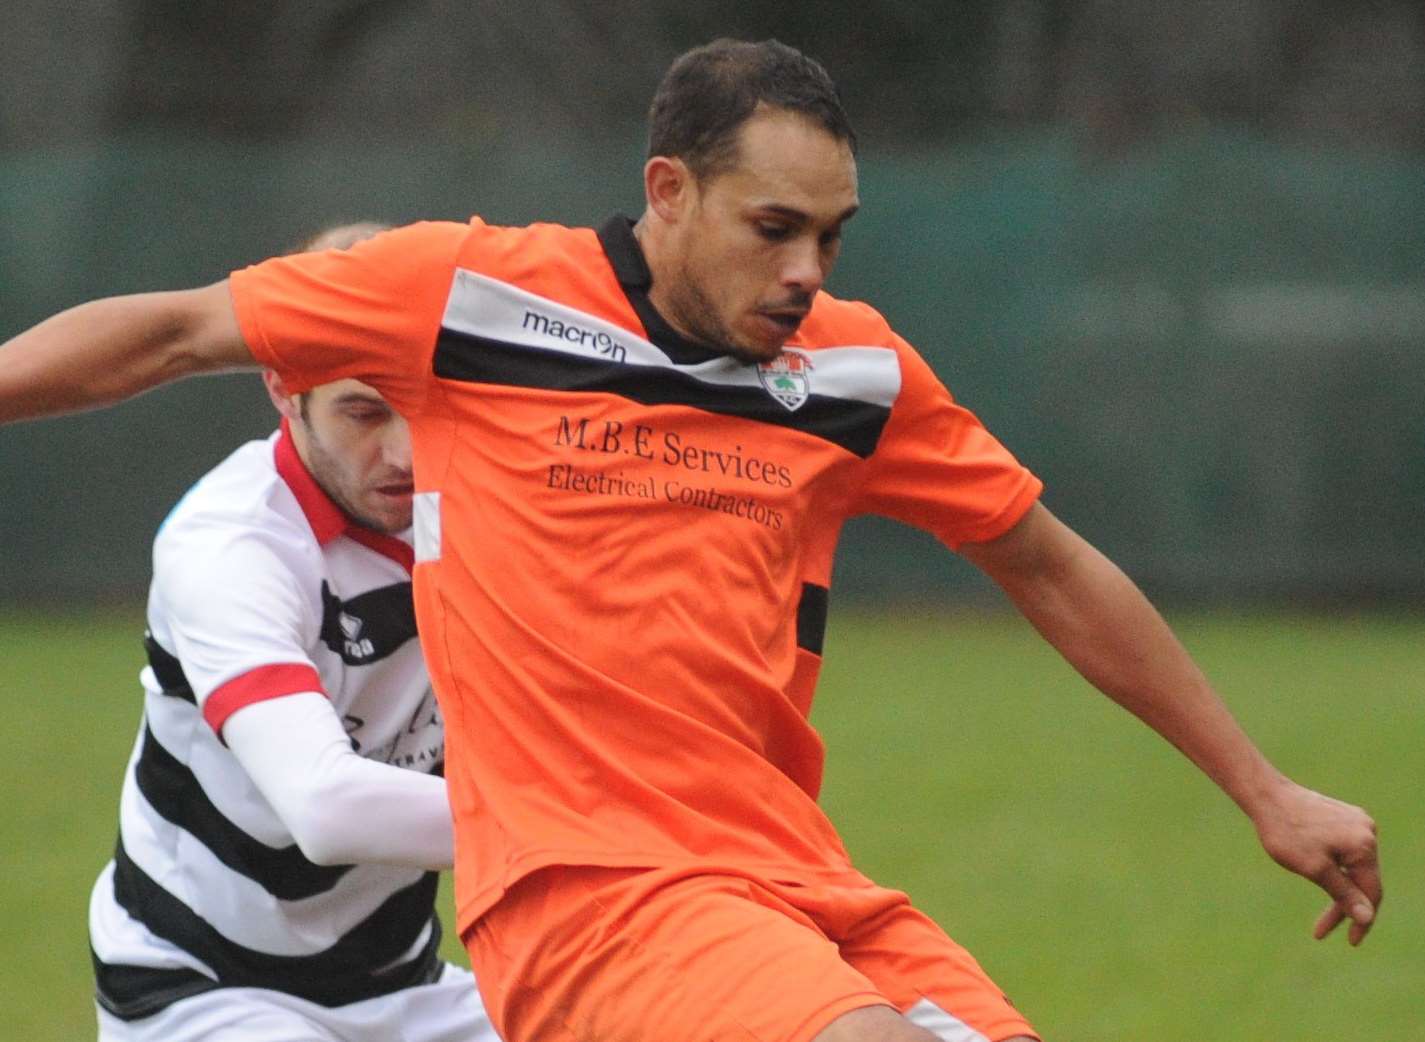 Danny Grant playing for Lordswood in December last year